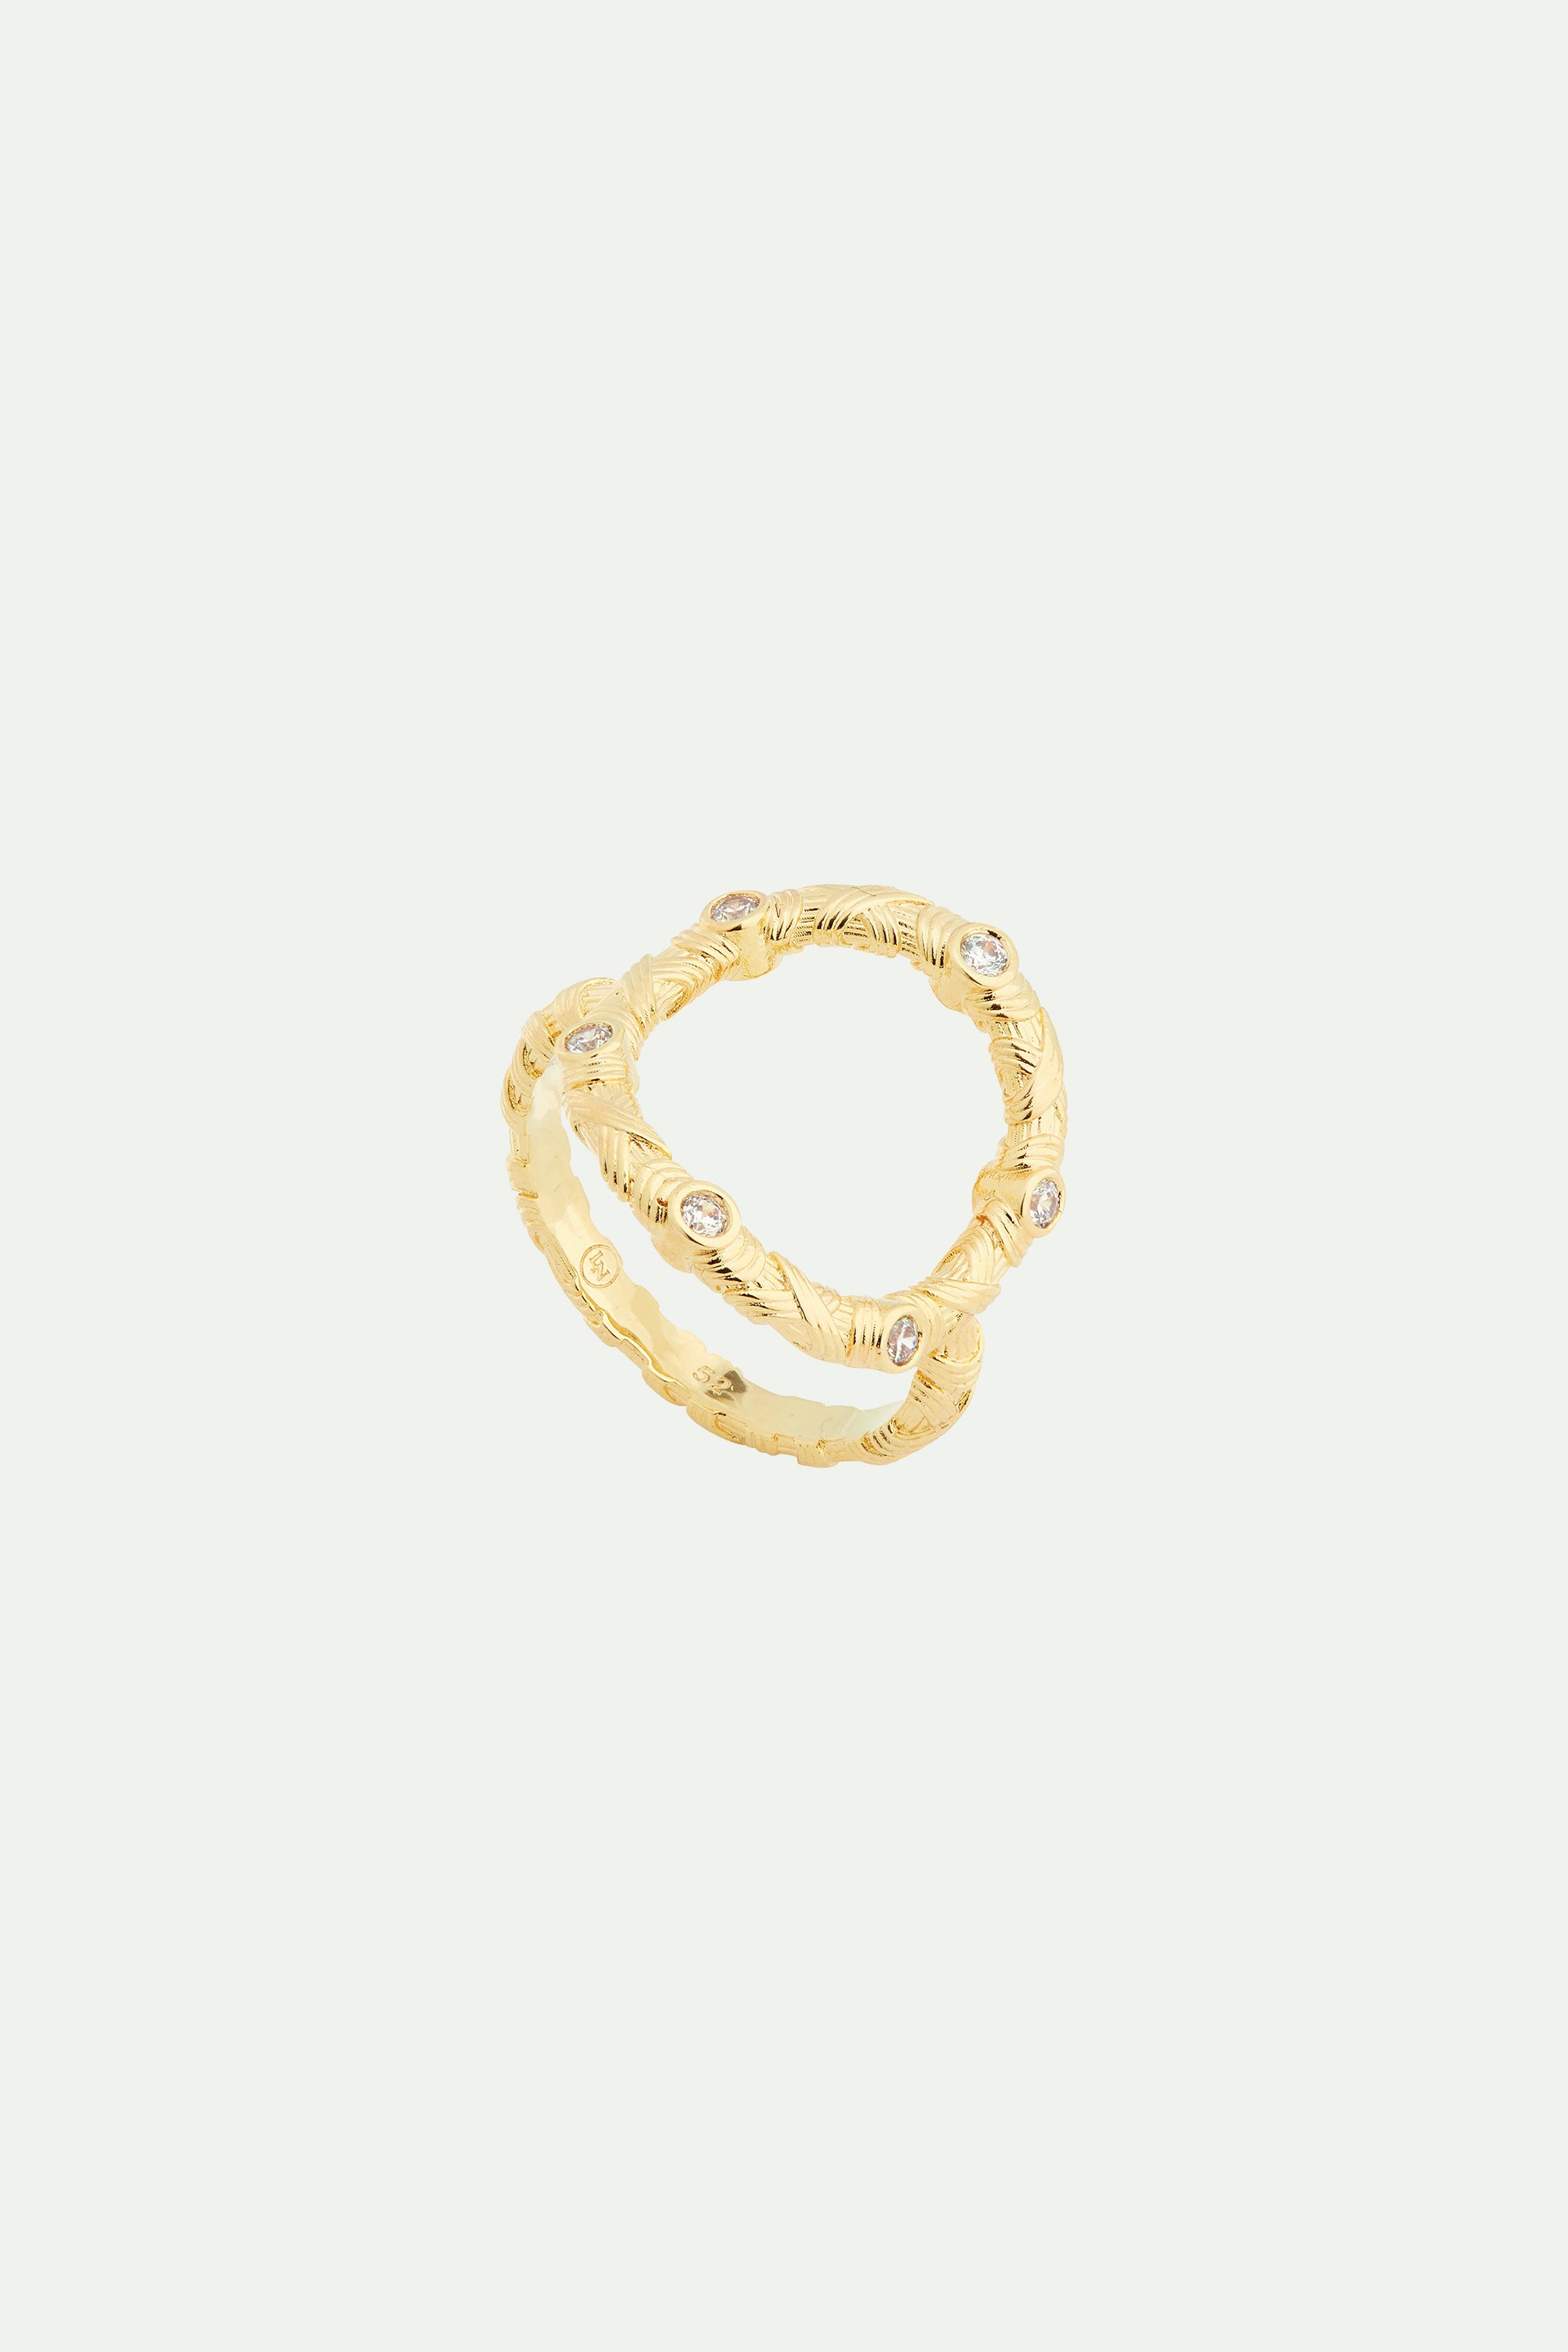 Wicker cocktail ring